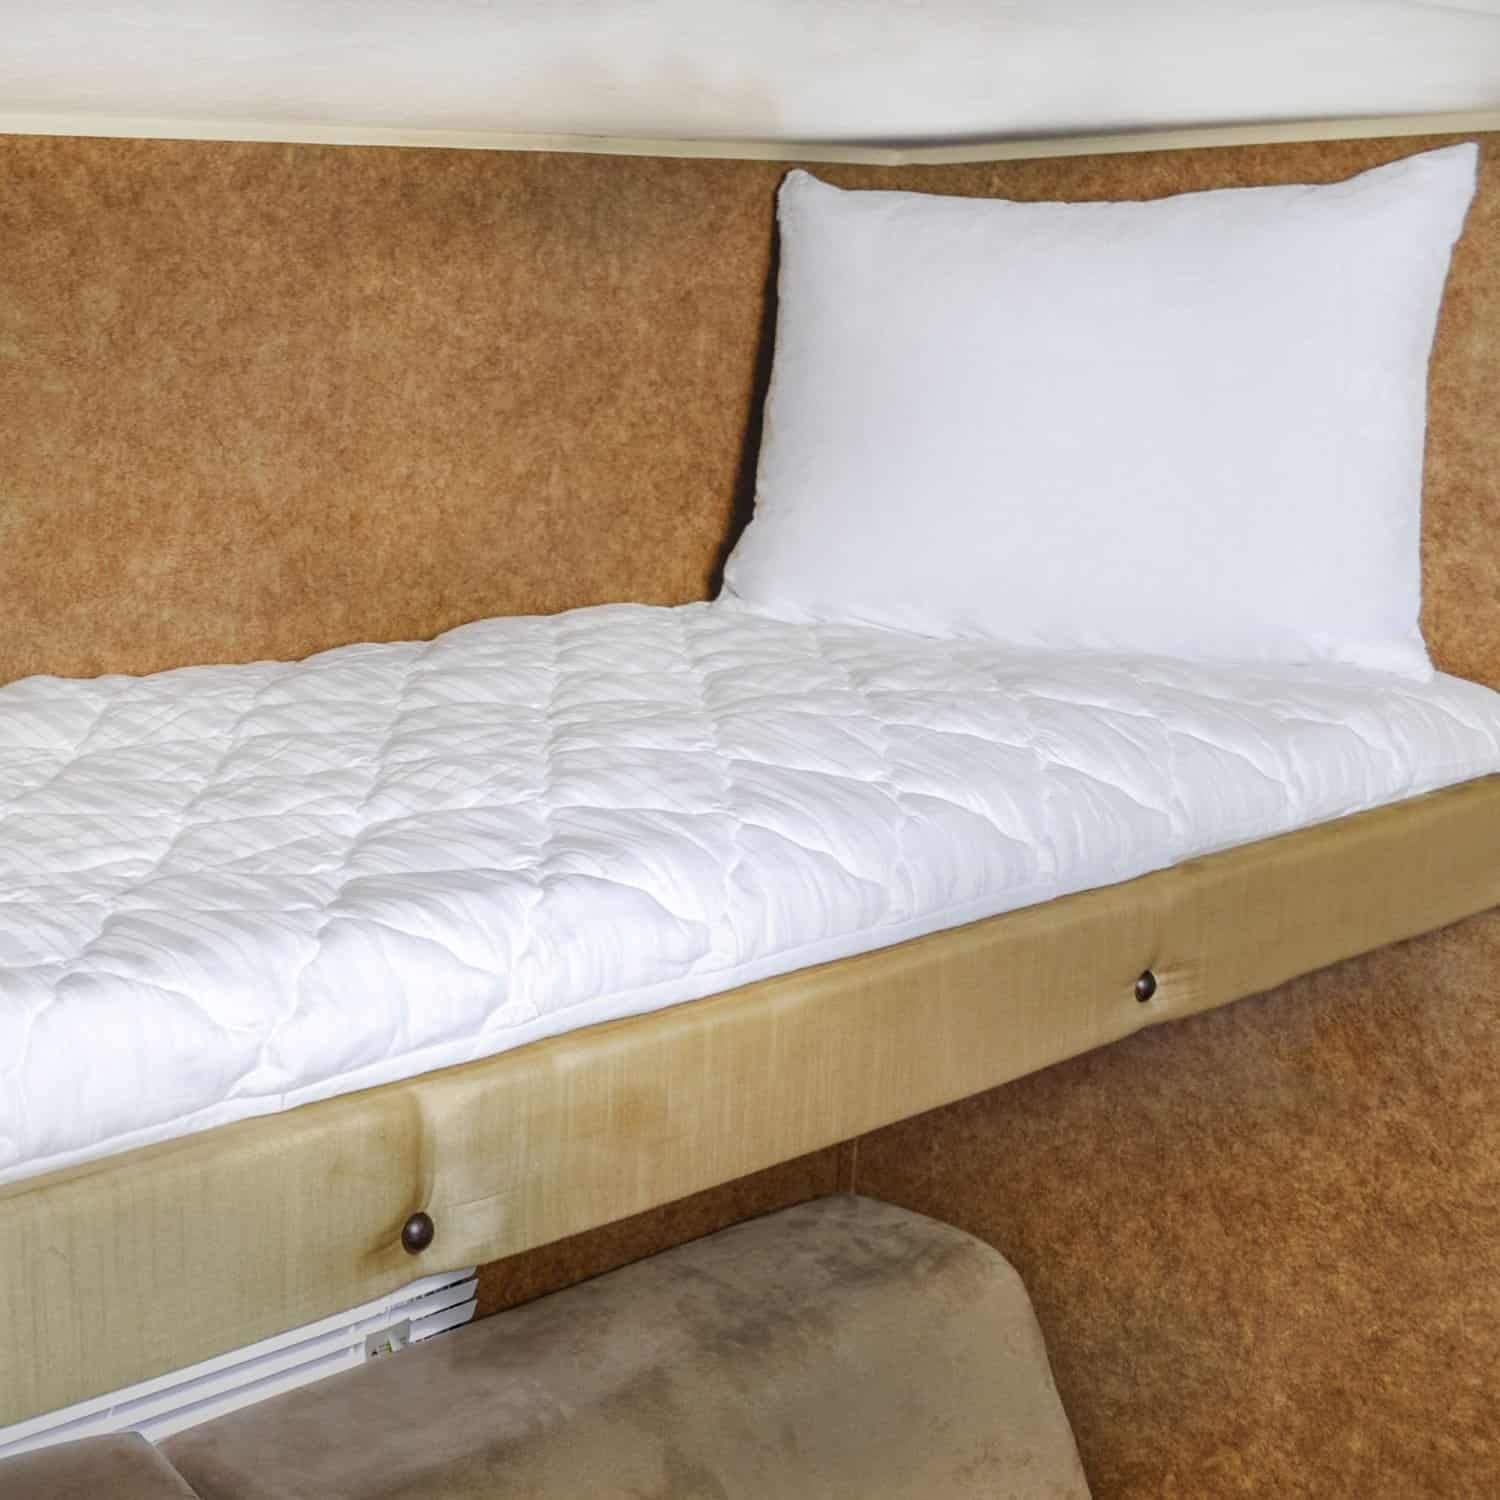 Rv Mattress Sizes Types And Places To, Bunk Bed Size Mattress